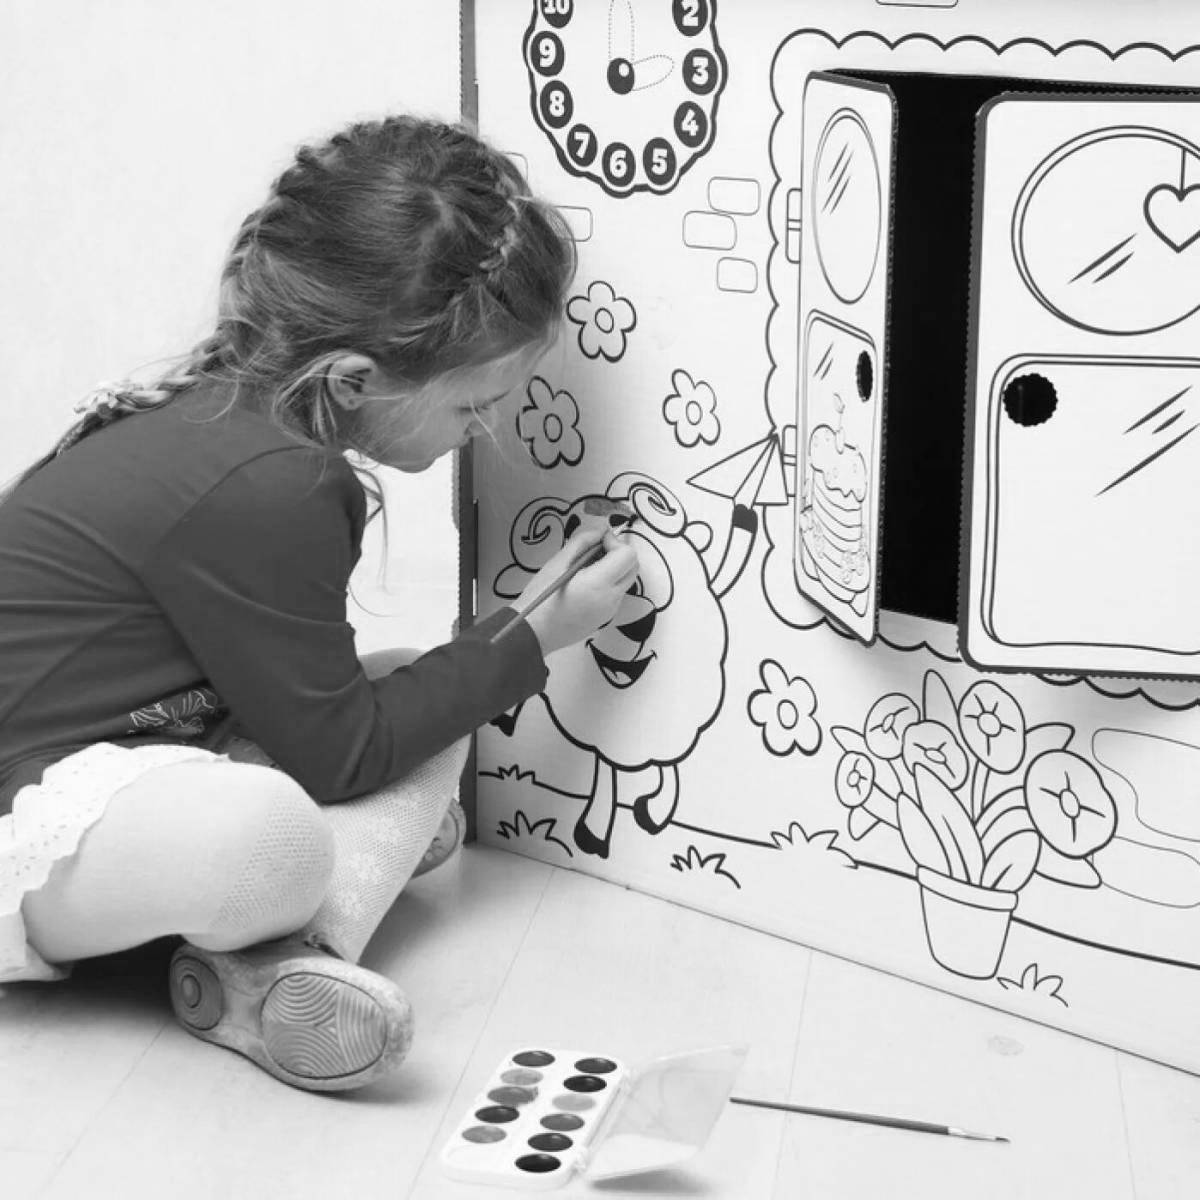 Shiny cardboard house coloring page